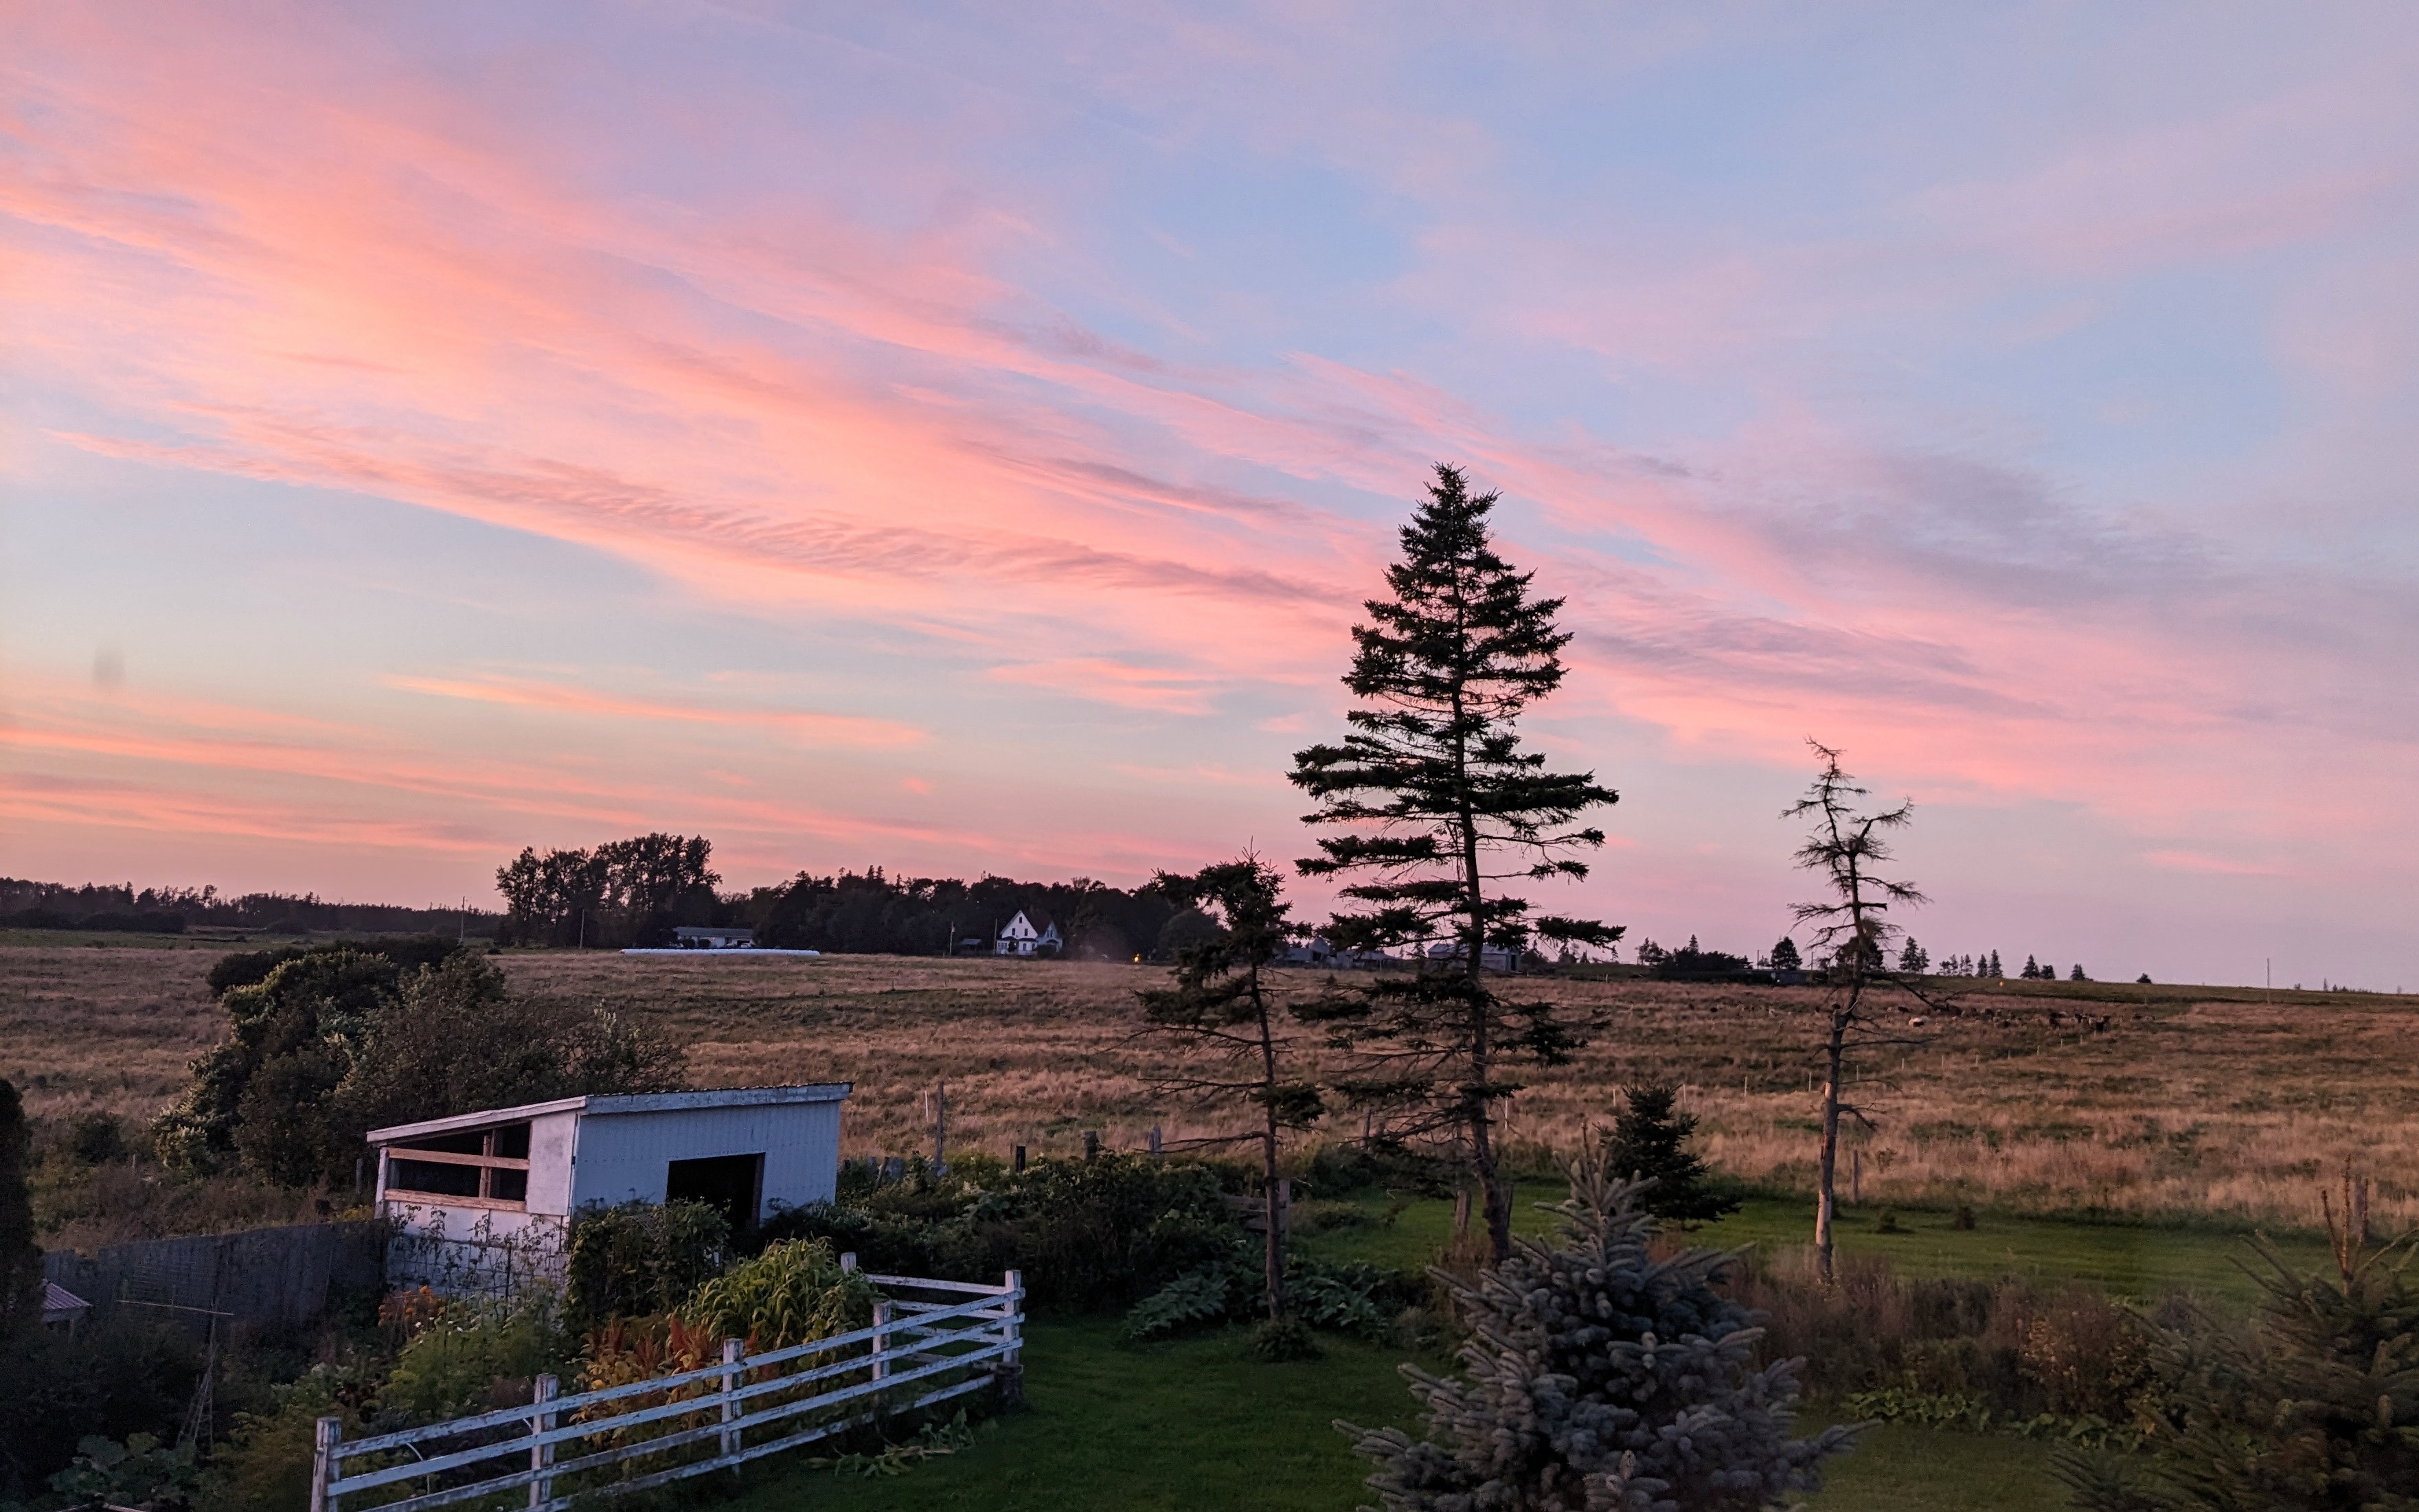 Veggie garden and shed with pink sunset.